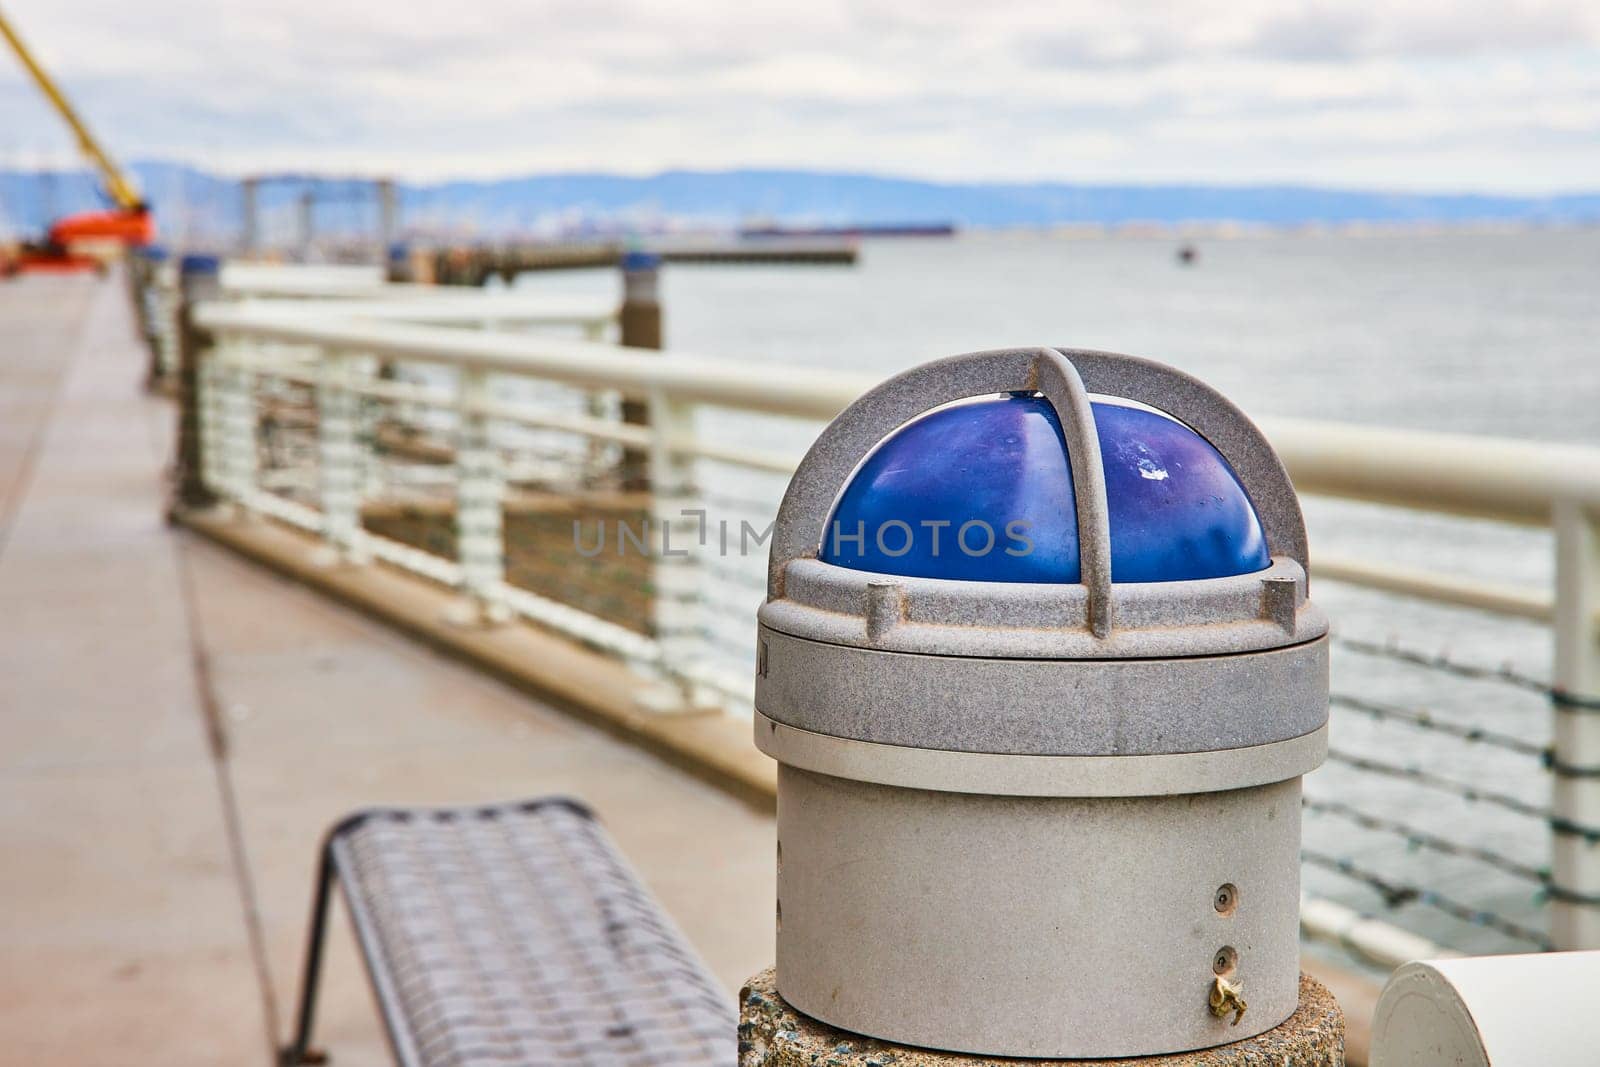 Image of Blue light on heavy duty harbor railing with blurry background of San Francisco Bay